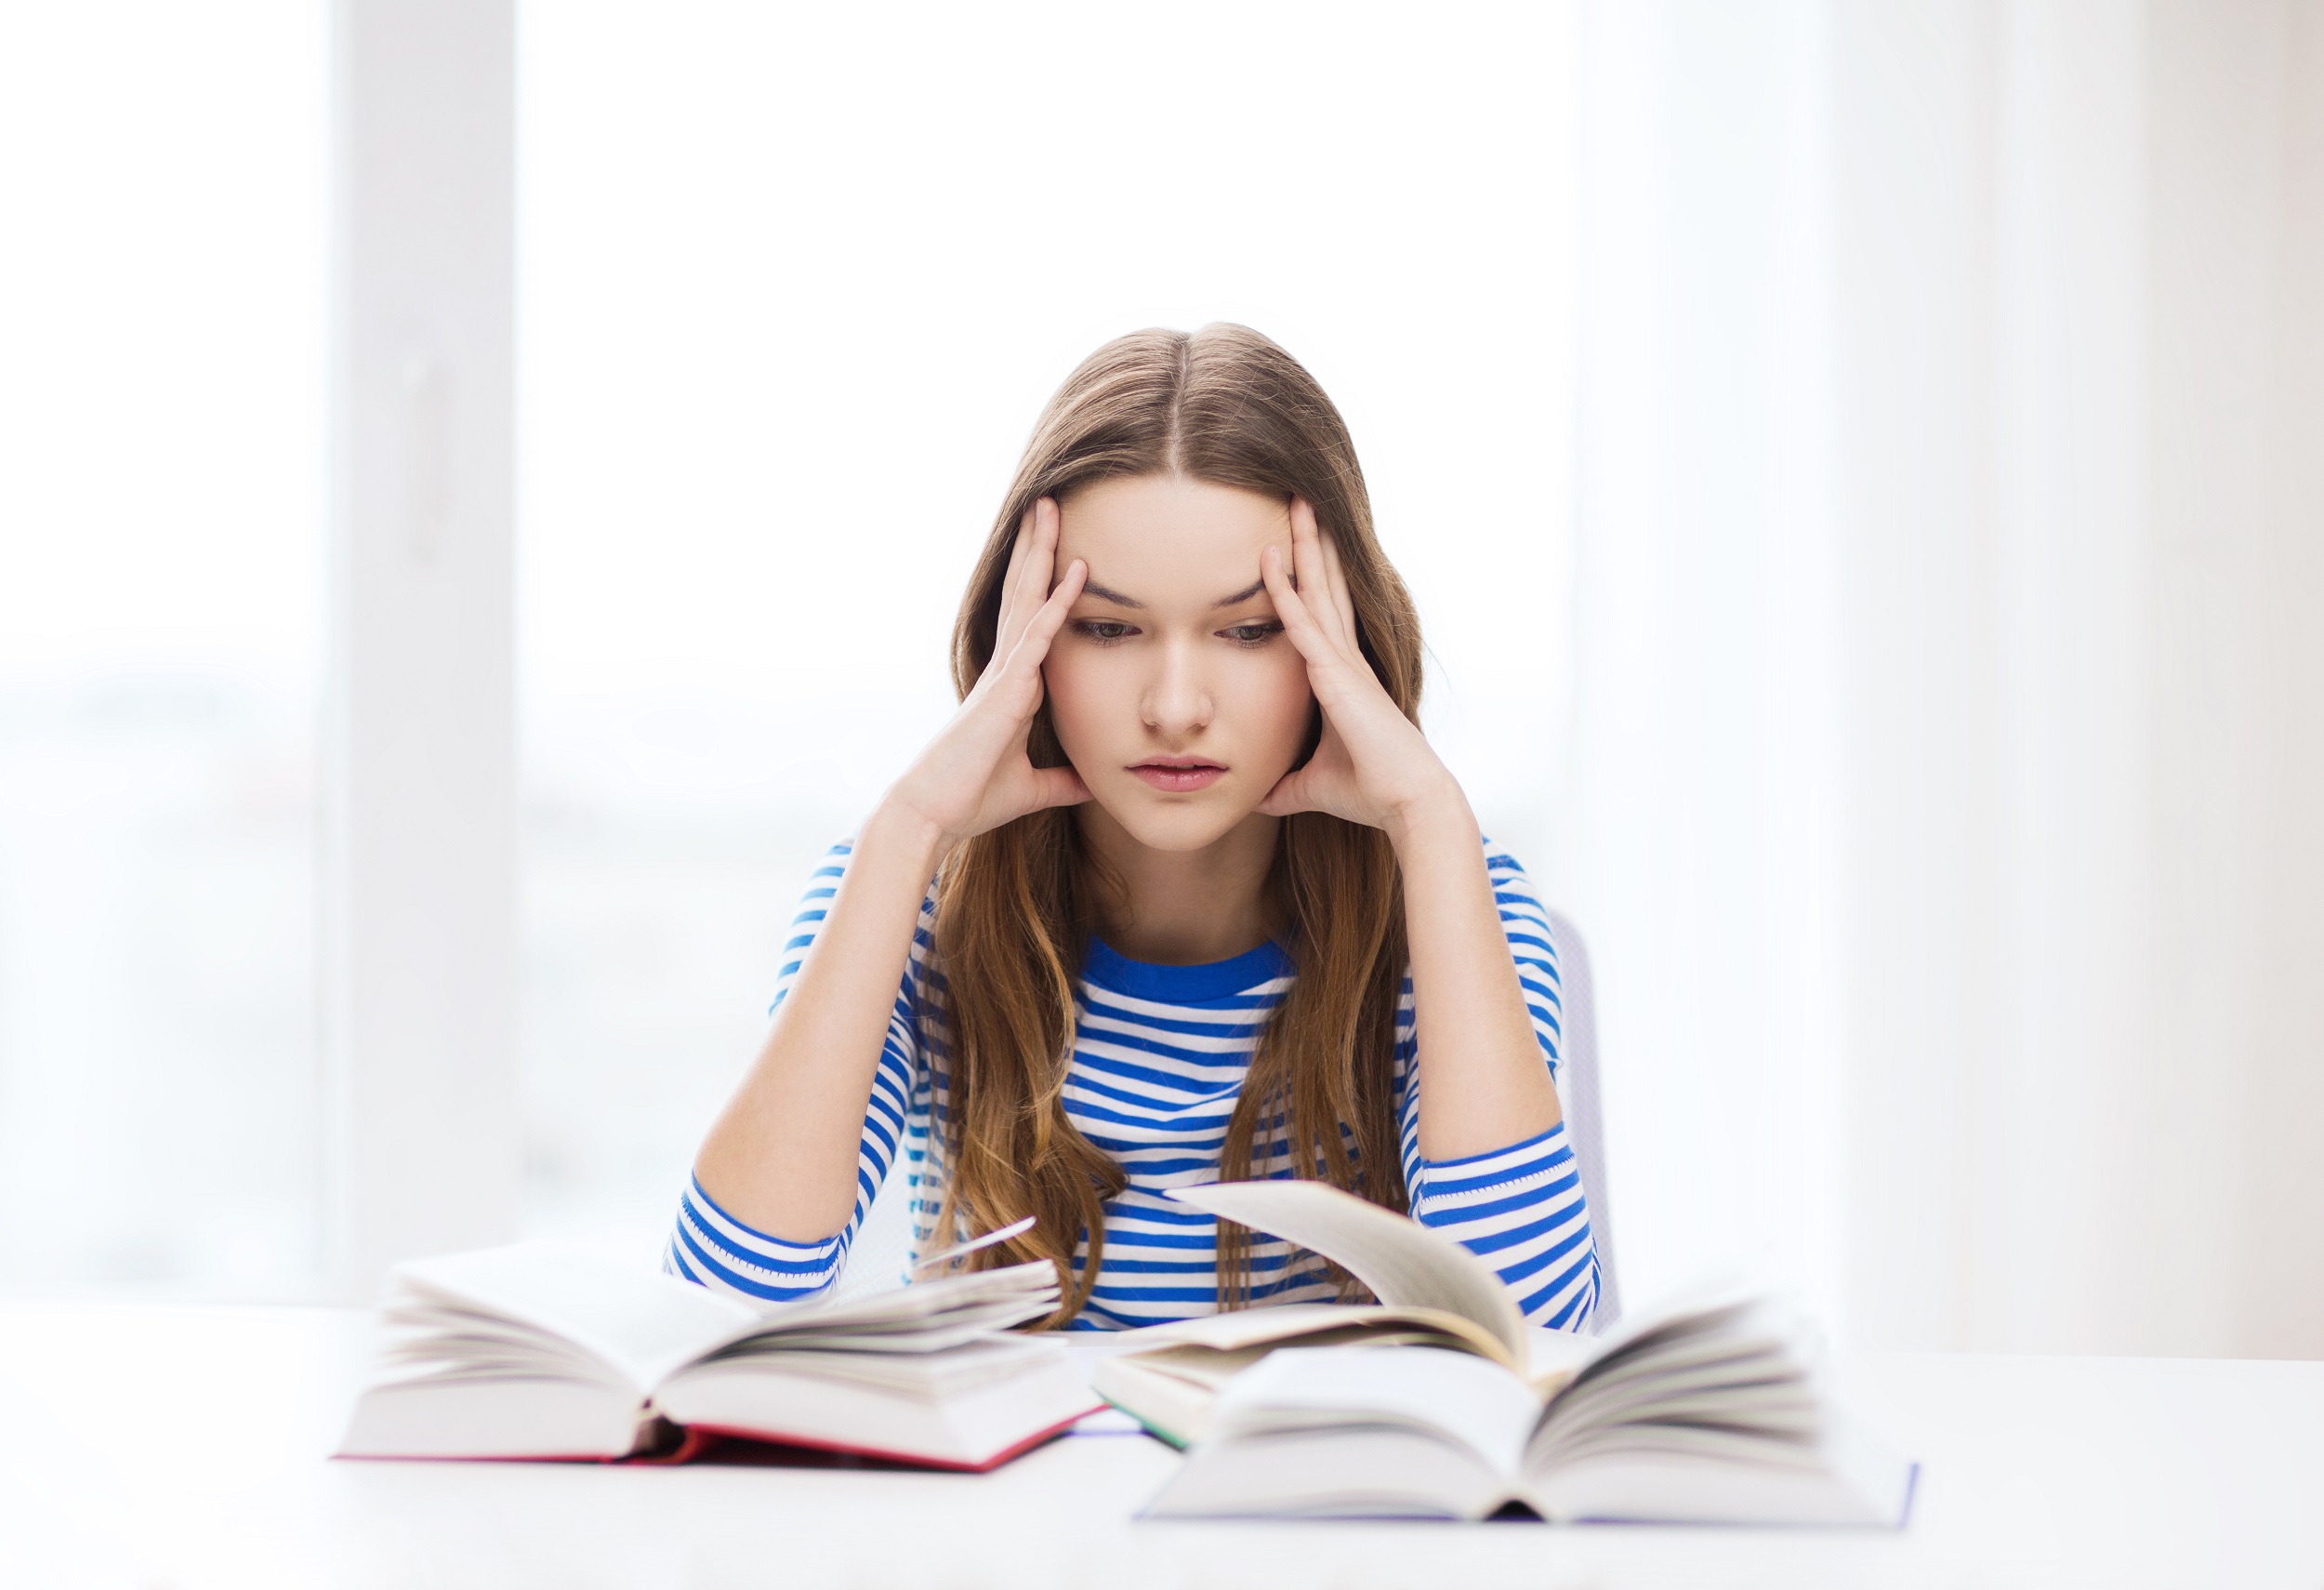 Education,And,Home,Concept,-,Stressed,Student,Girl,With,Books